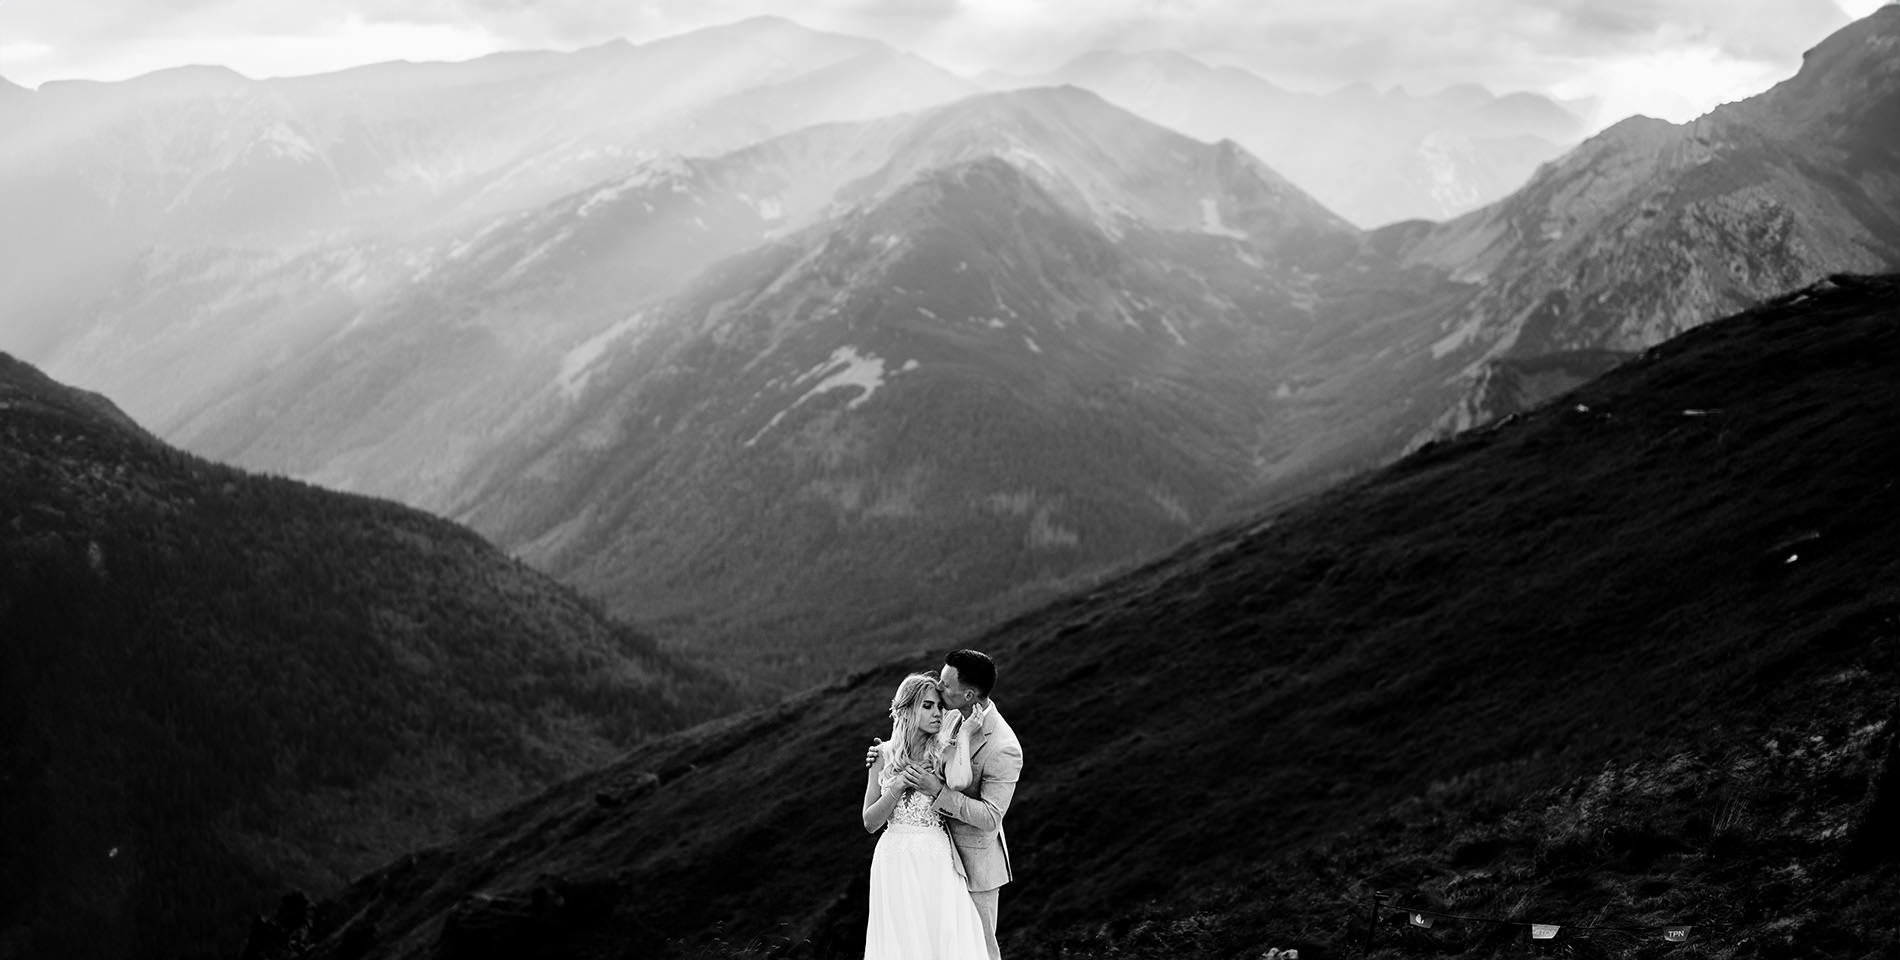 Elopements
Wedding photoshoot in the Tatra Mountains